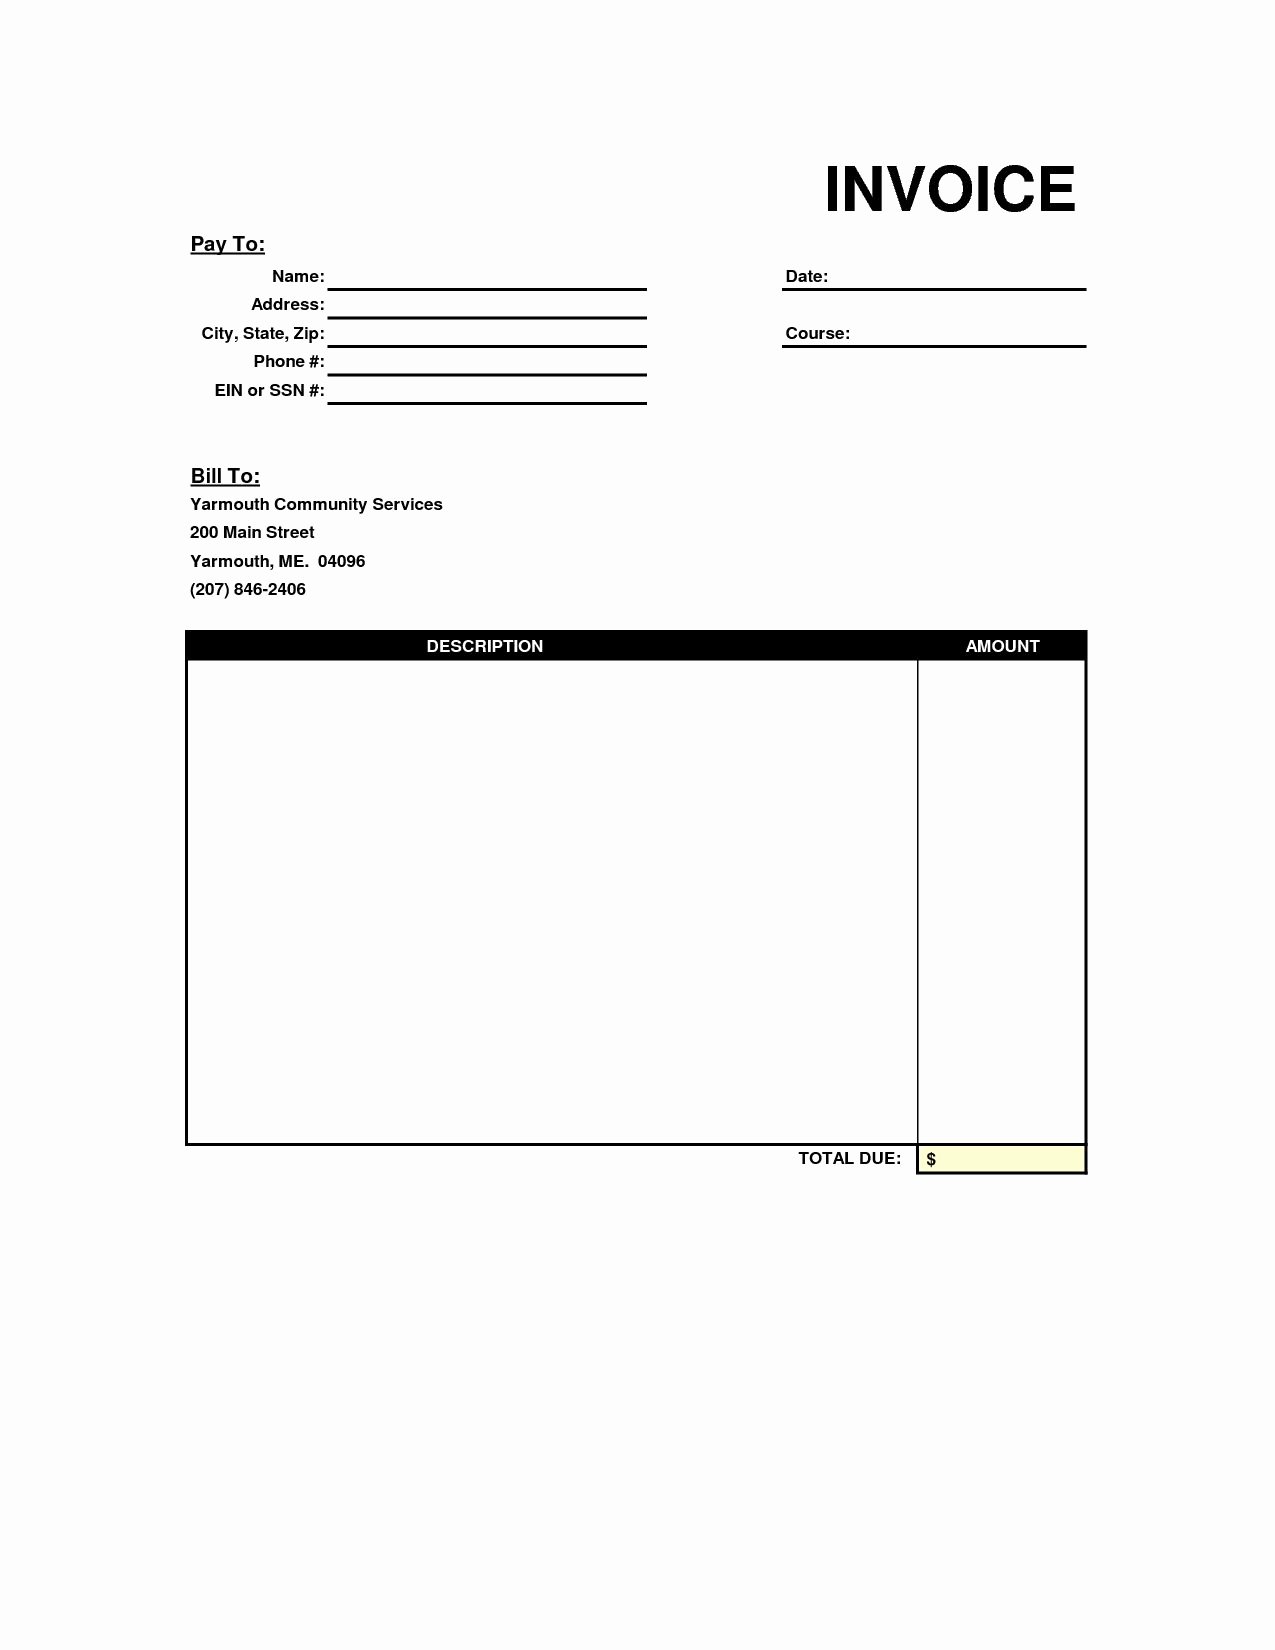 Blank Invoice Template Free Lovely Blank Copy Of An Invoice Google Recruiter Resume Copy Of